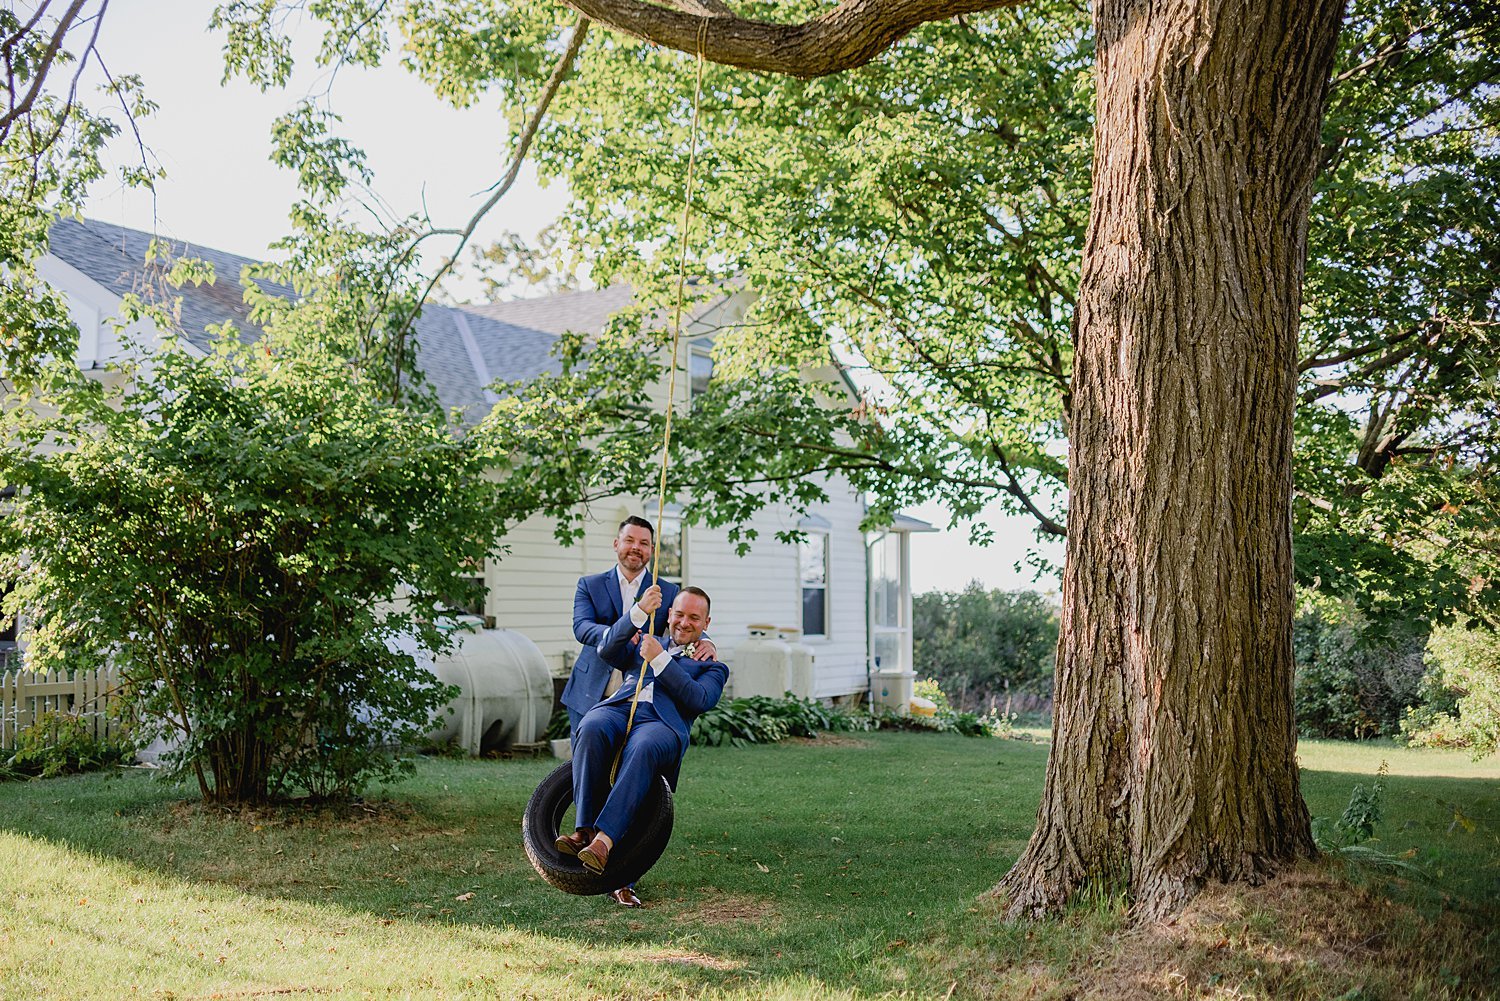 An Intimate Elopement at an Airbnb in Prince Edward County | Prince Edward County Wedding Photographer | Holly McMurter Photographs_0035.jpg